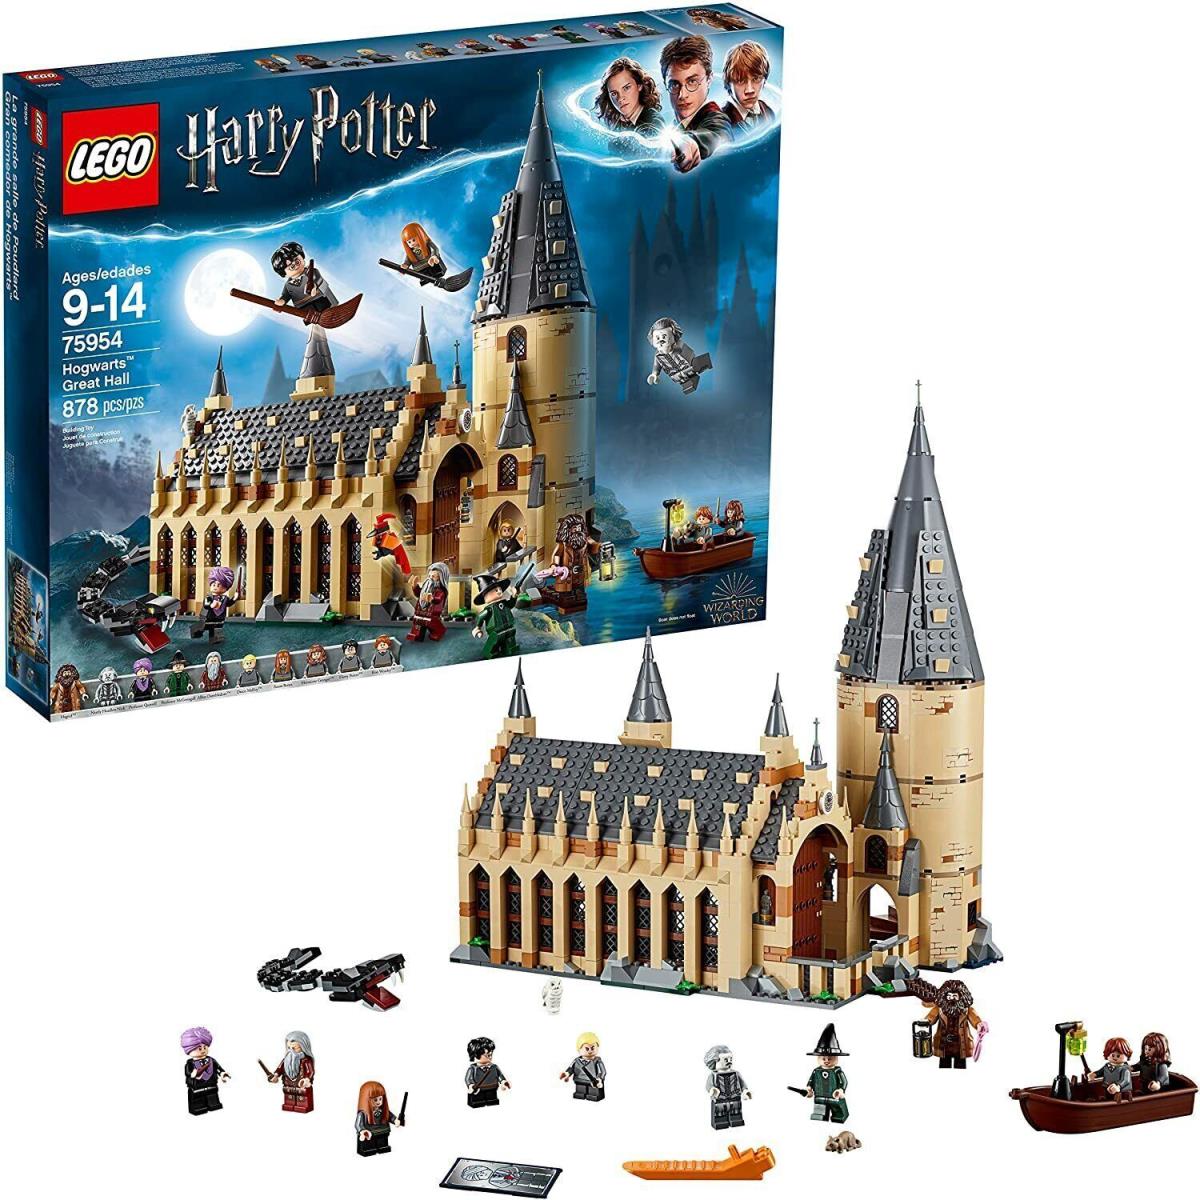 Lego Sets: Various Sets Years Themes Characters - New/sealed - You Pick 75954 2018 Lego Harry Potter Hogwarts Great Hall